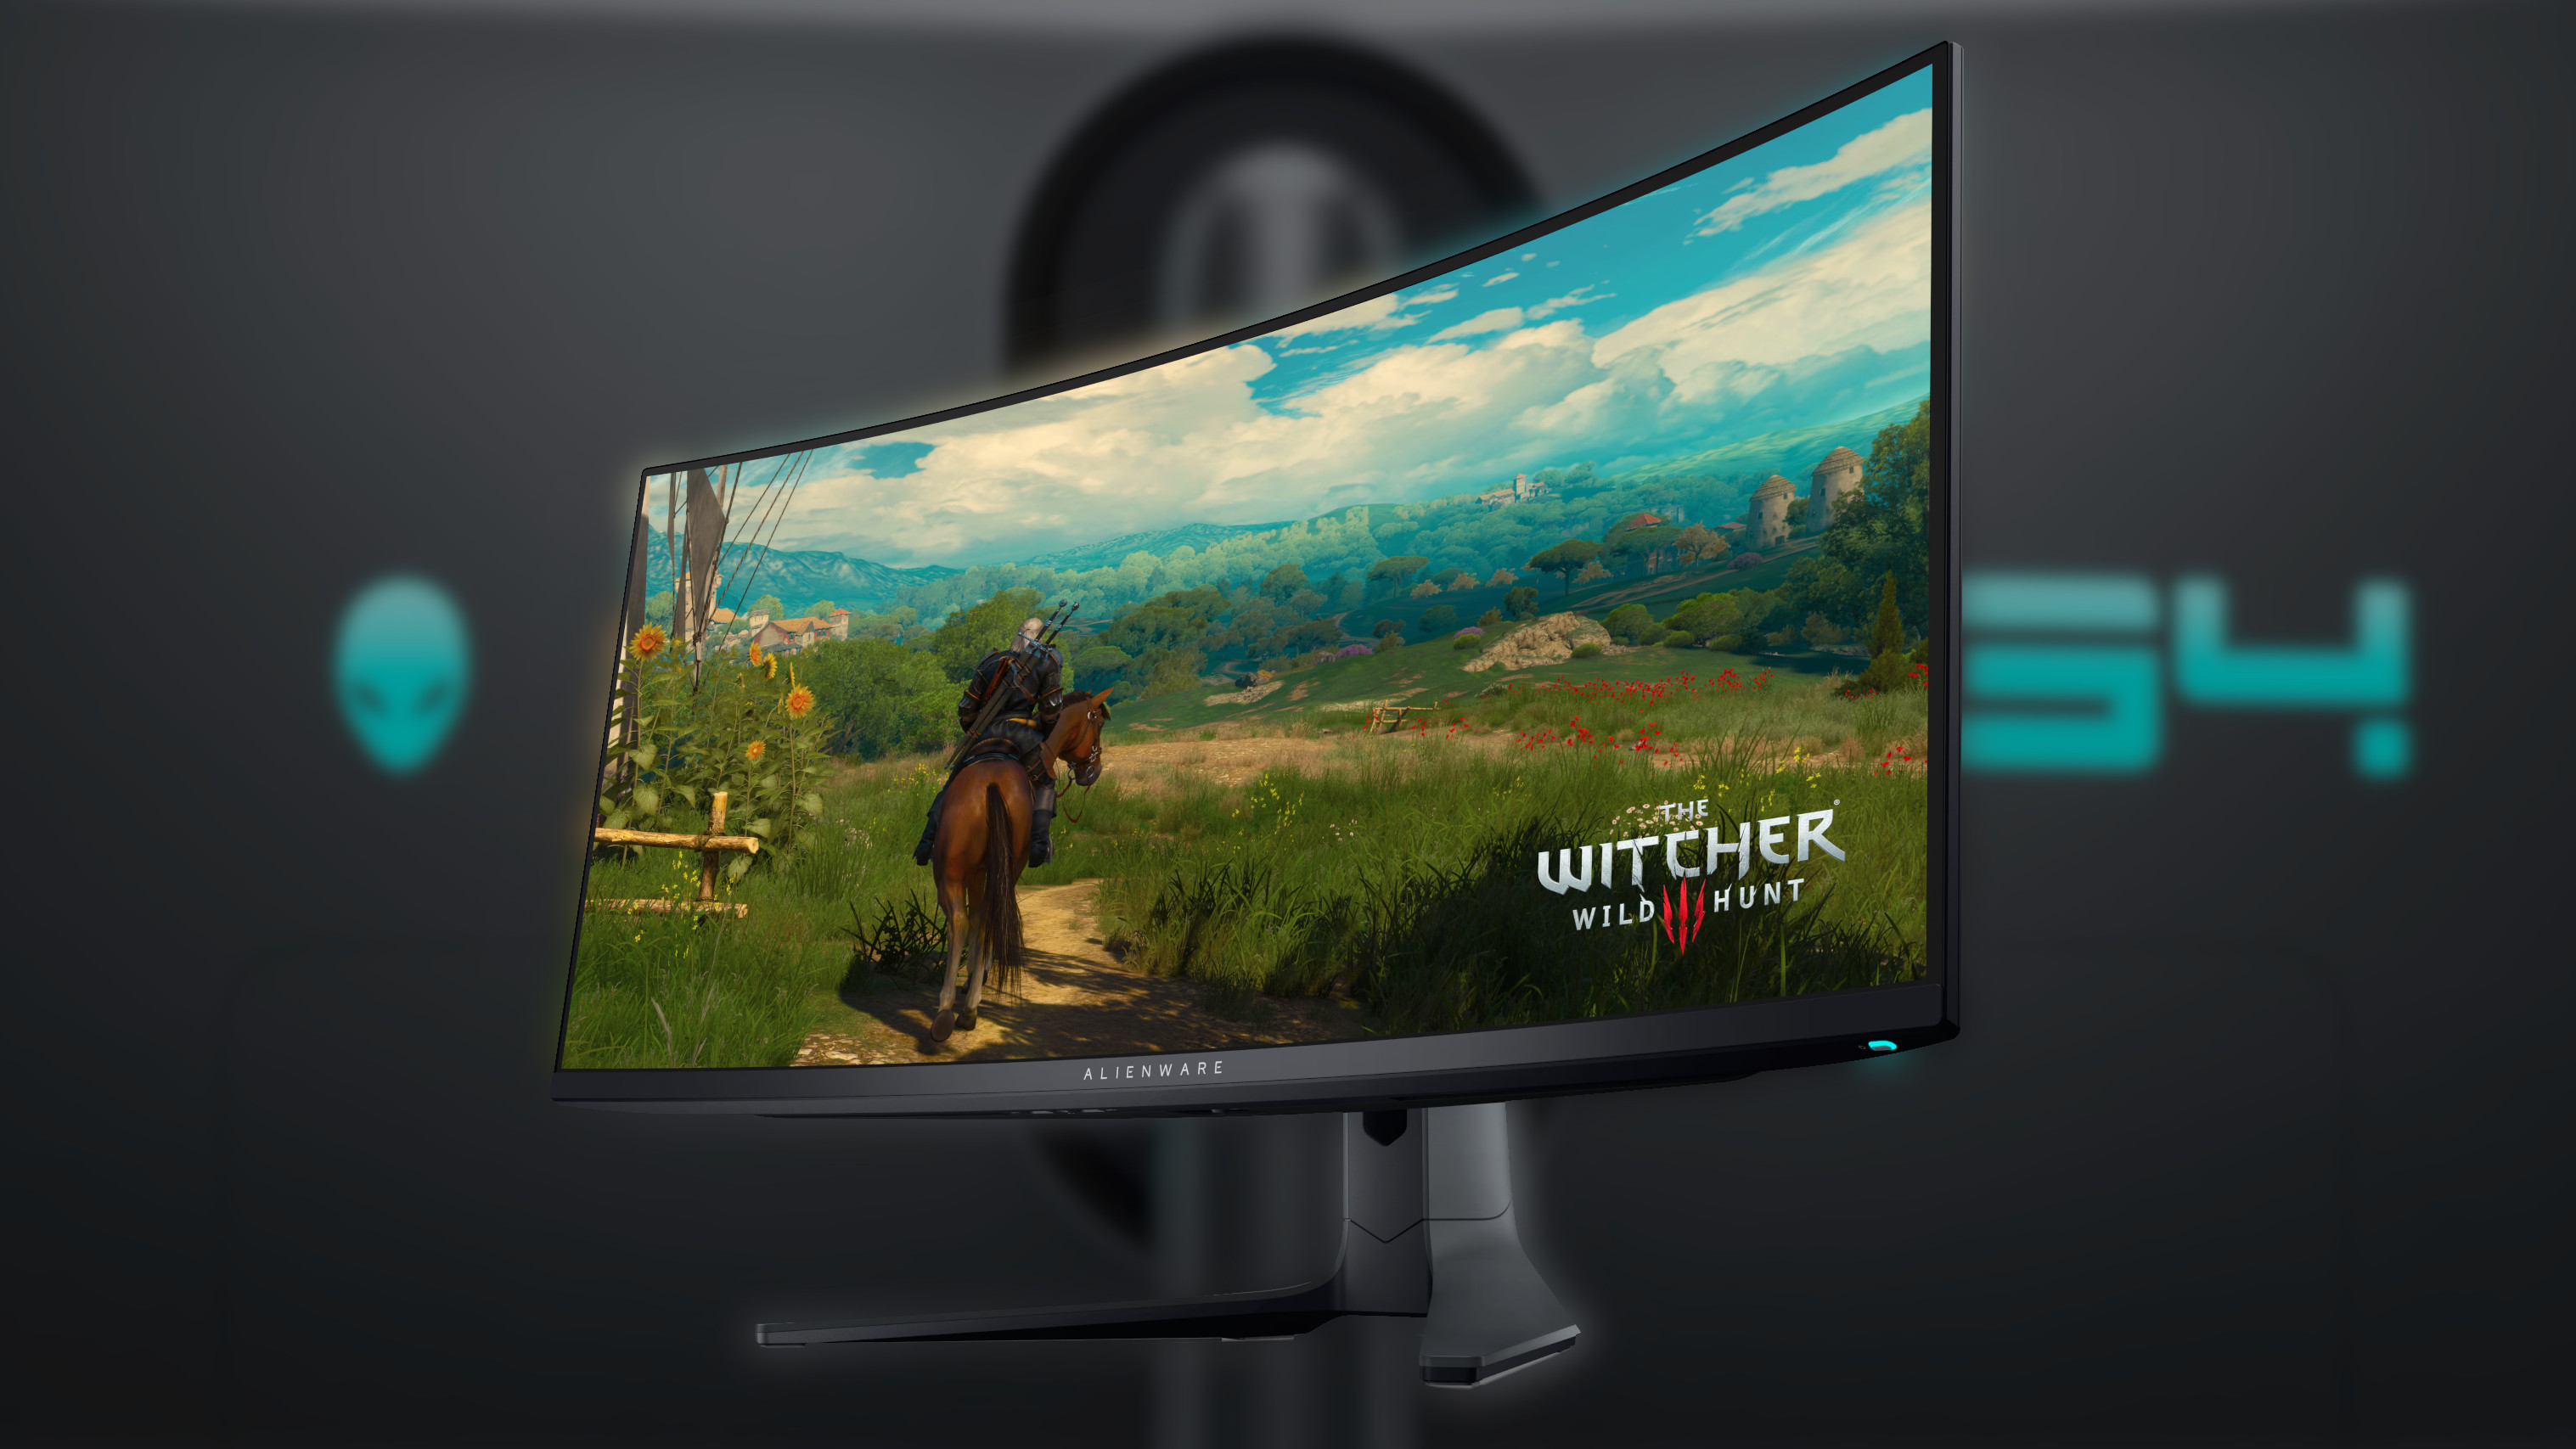 Our favorite 1440p 165Hz gaming monitor is $100 cheaper for Cyber Monday